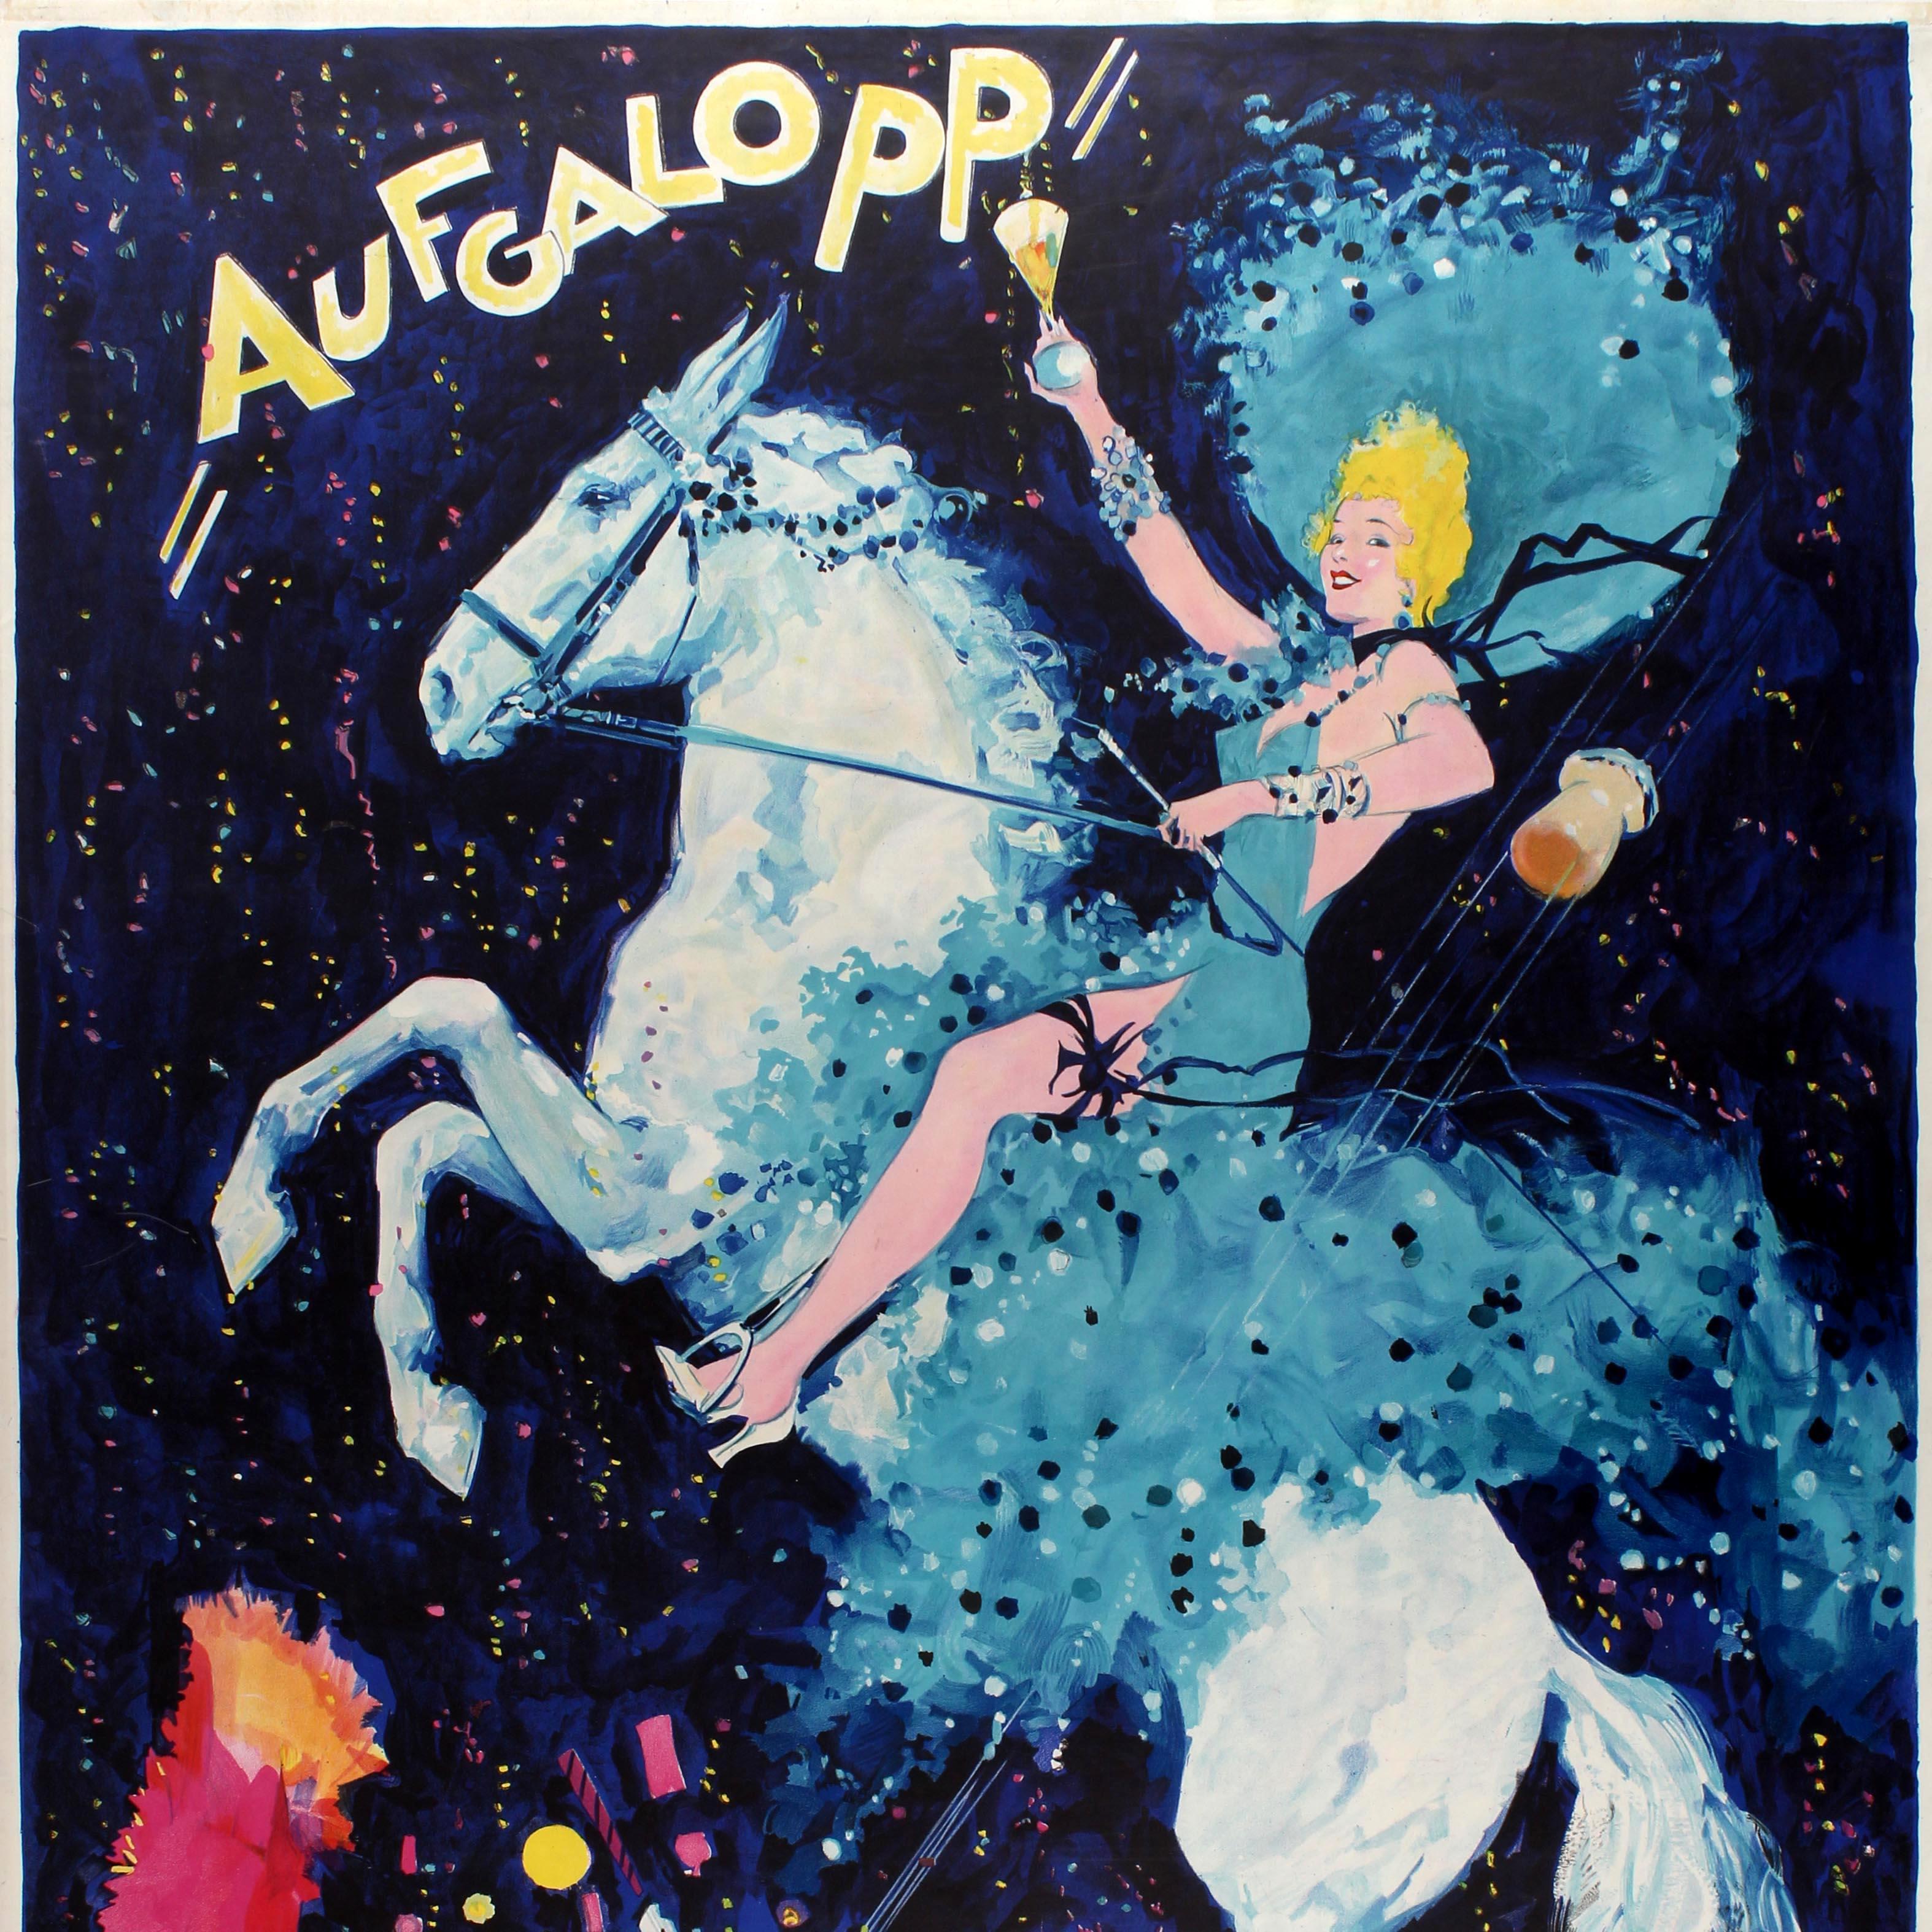 German Large Original Vintage Poster for the Aufgalopp Faschingsfest Carnival in Munich For Sale